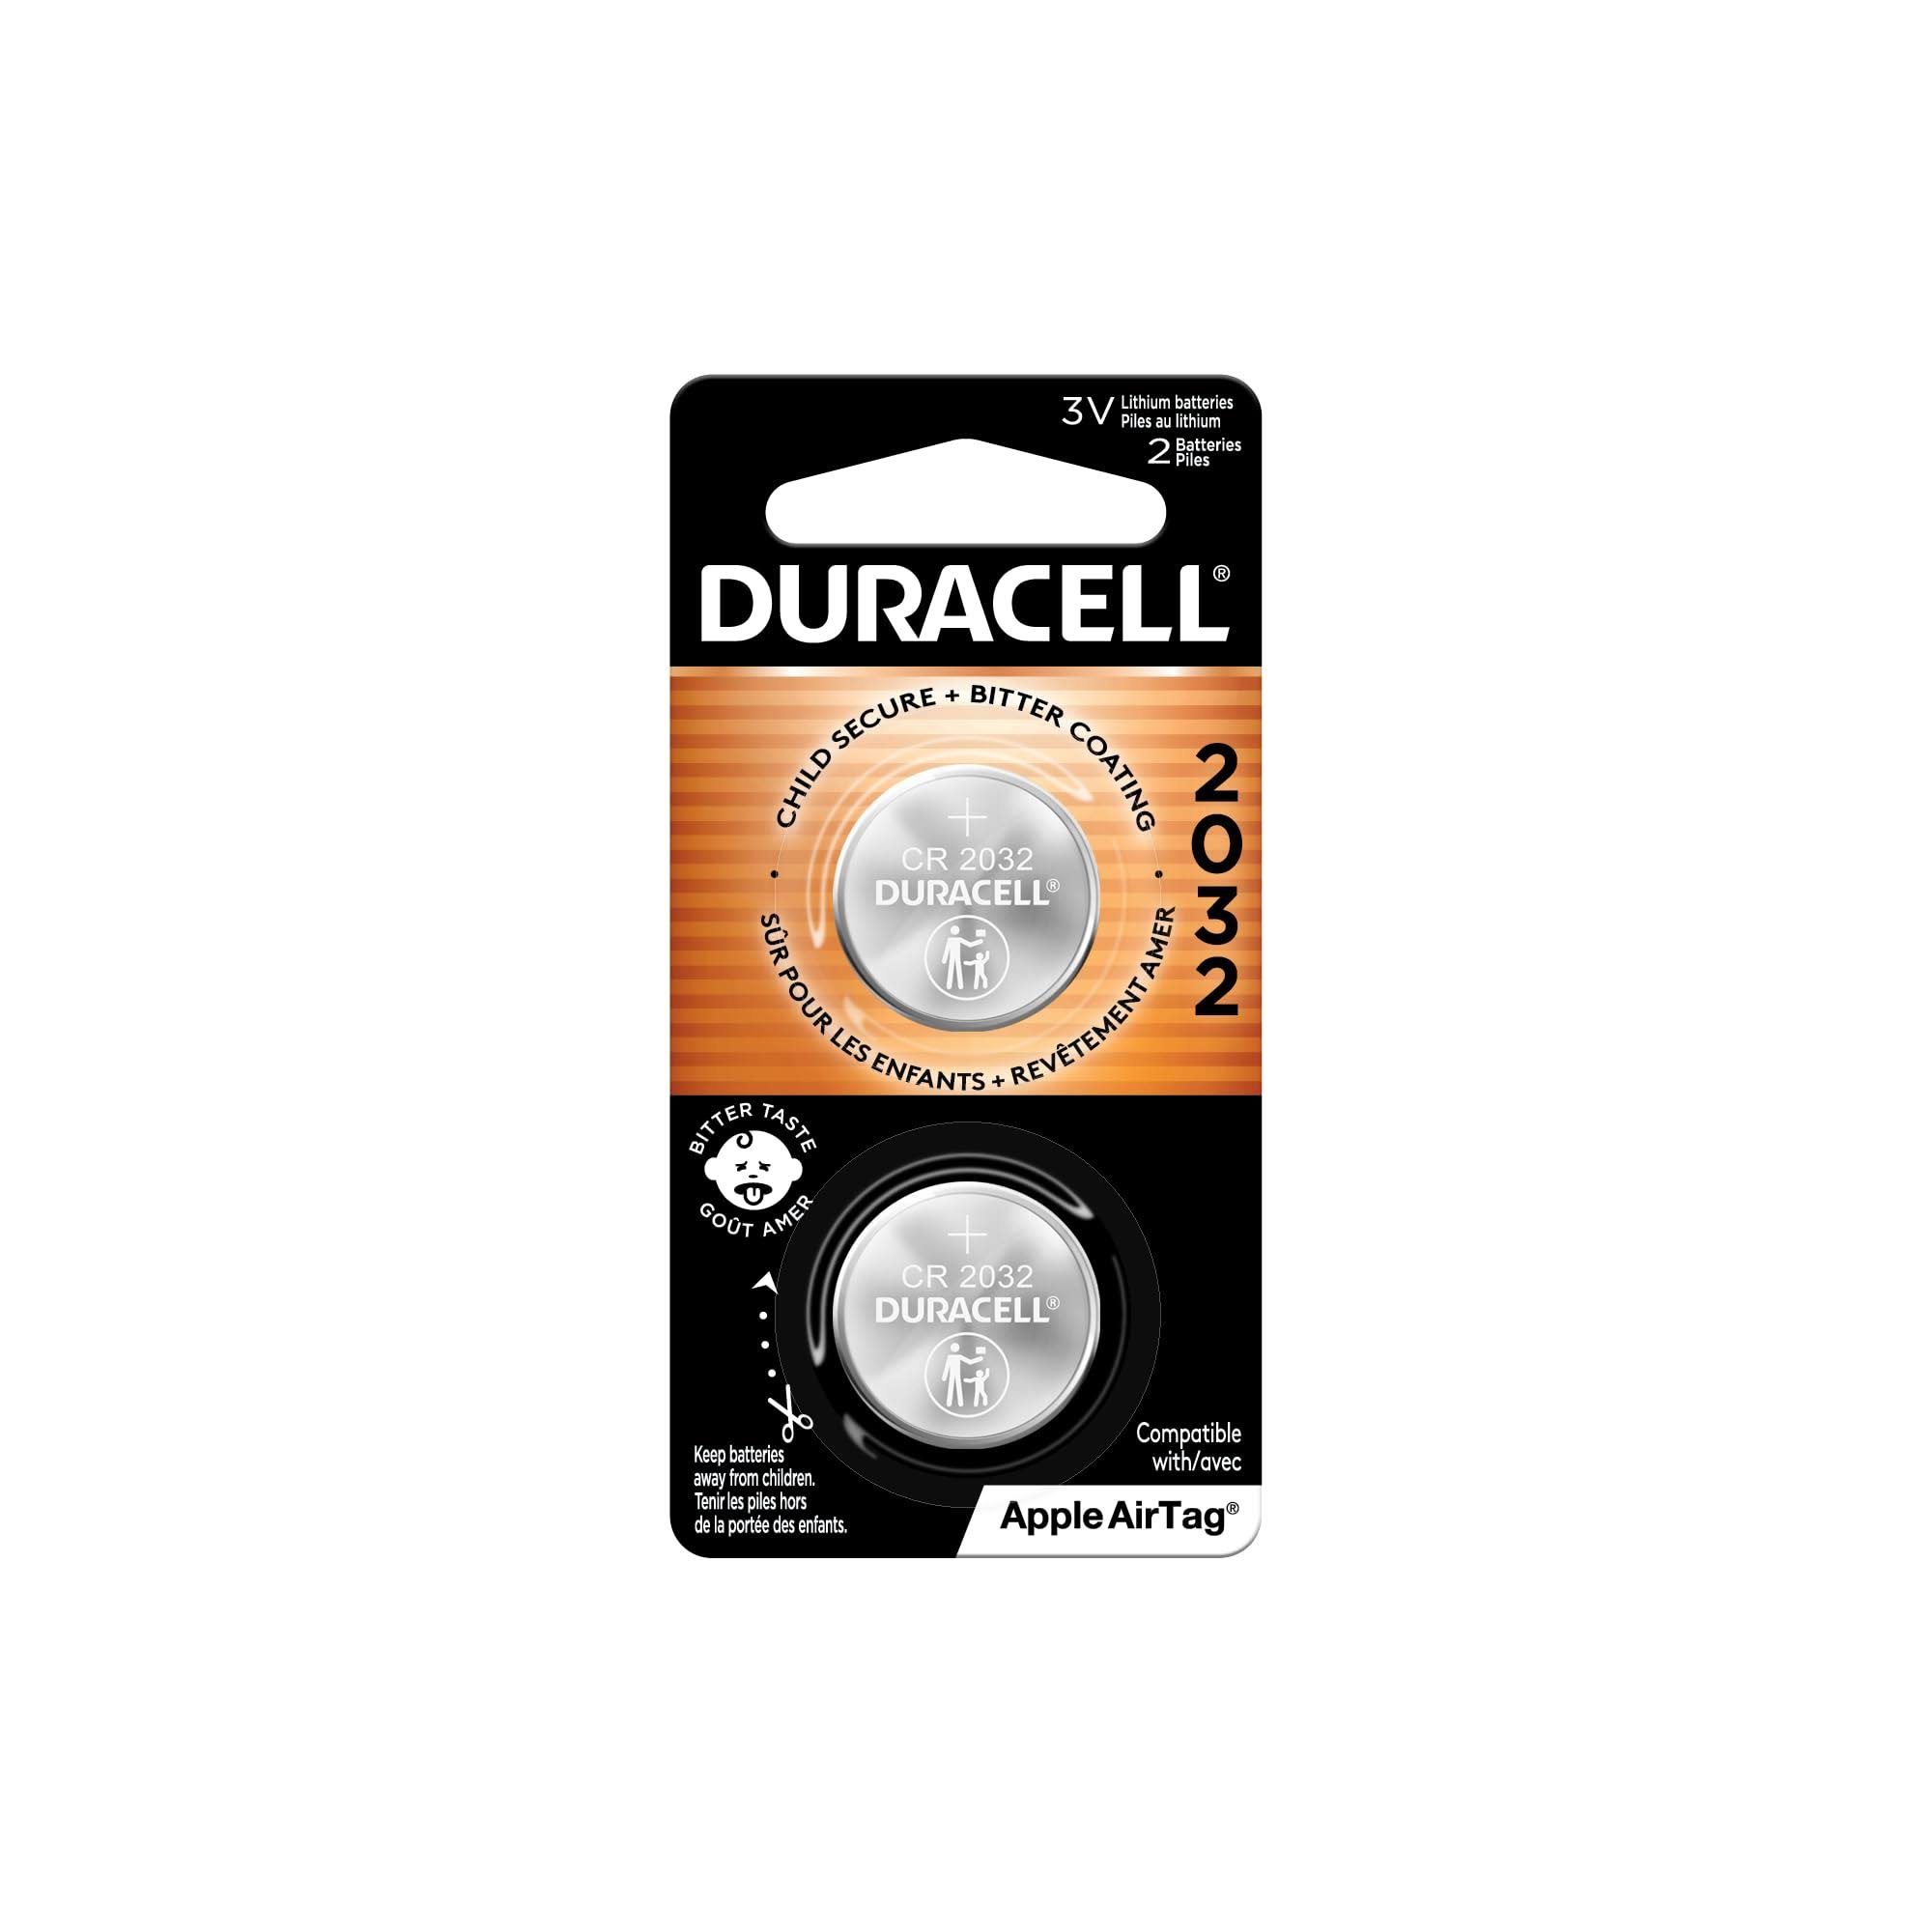 Duracell 2032 Lithium Coin Battery 3V - 2 Pack